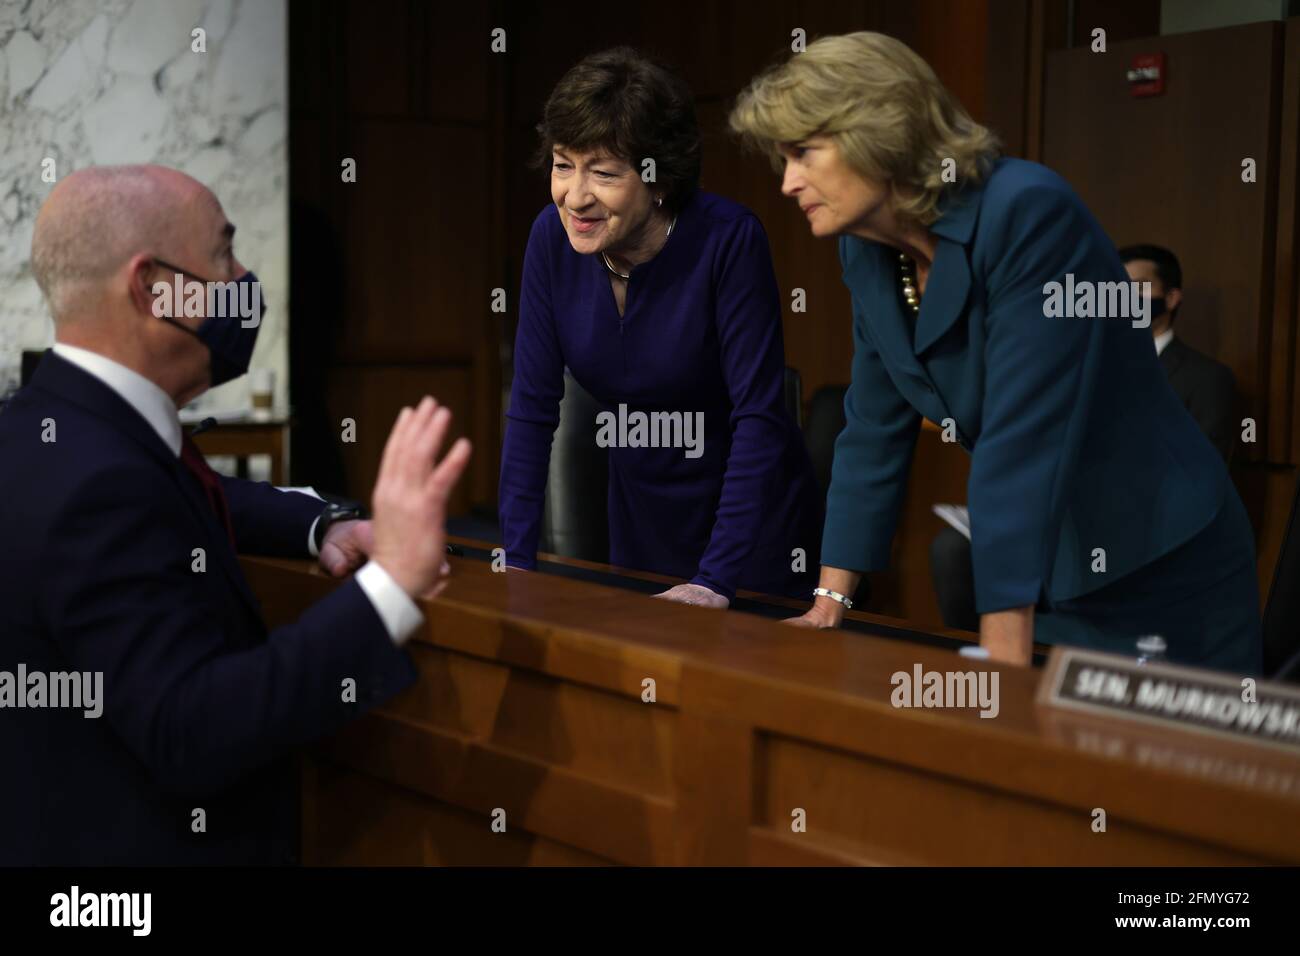 Washington, USA. 12th May, 2021. WASHINGTON, DC - MAY 12: U.S. Homeland Security Secretary Alejandro Mayorkas (L) talks to Sen. Susan Collins (R=ME) (2nd L) and Sen. Lisa Murkowski (R-AK) (R) during a break of a hearing before the Senate Appropriations Committee at Hart Senate Office Building on May 12, 2021 on Capitol Hill in Washington, DC. The committee held a hearing on “Domestic Violent Extremism in America.” (Photo by Alex Wong/Pool/Sipa USA) Credit: Sipa USA/Alamy Live News Stock Photo